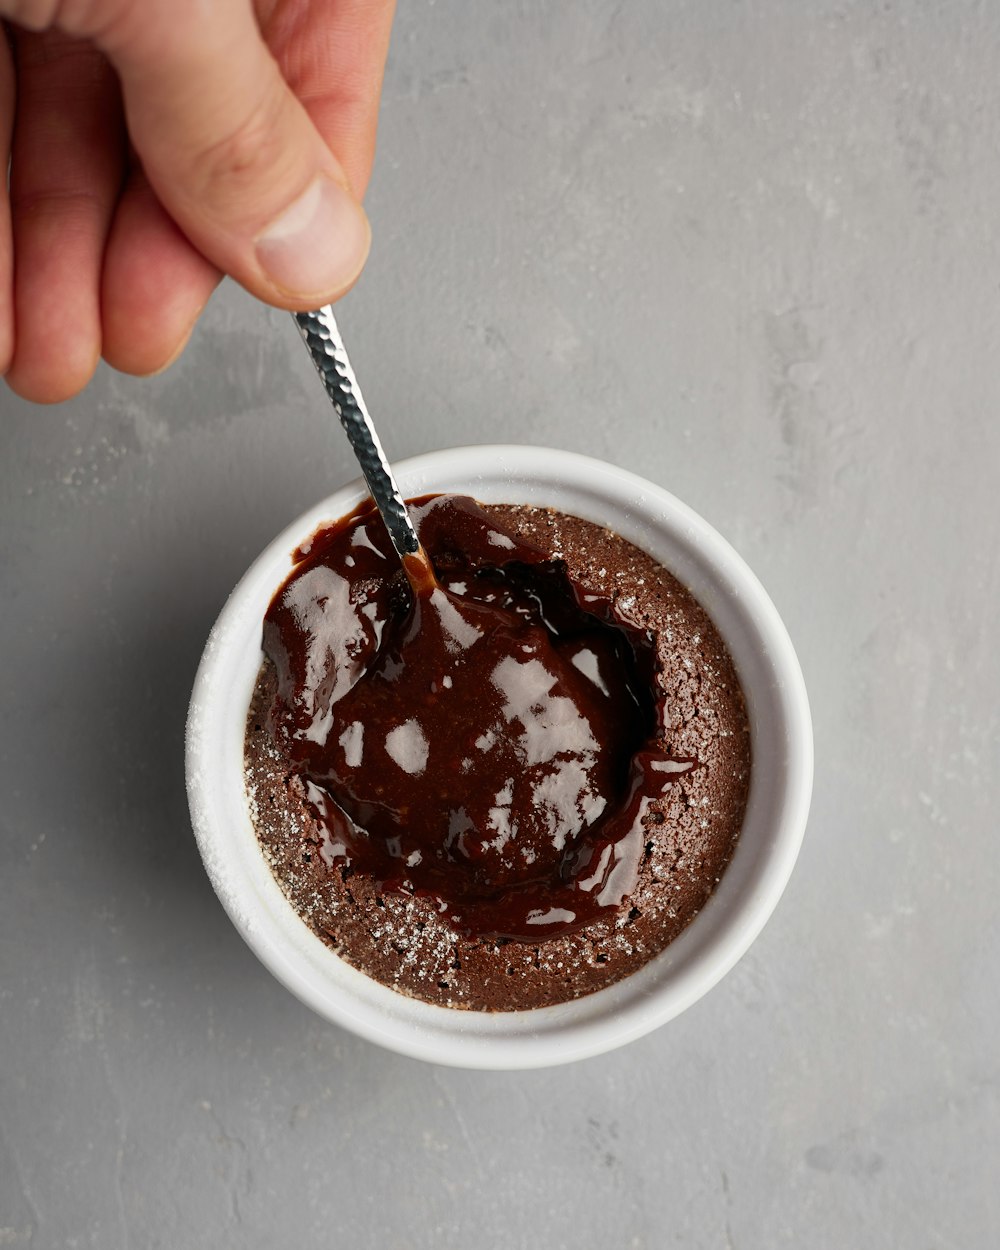 a hand holding a spoon over a bowl of chocolate cake